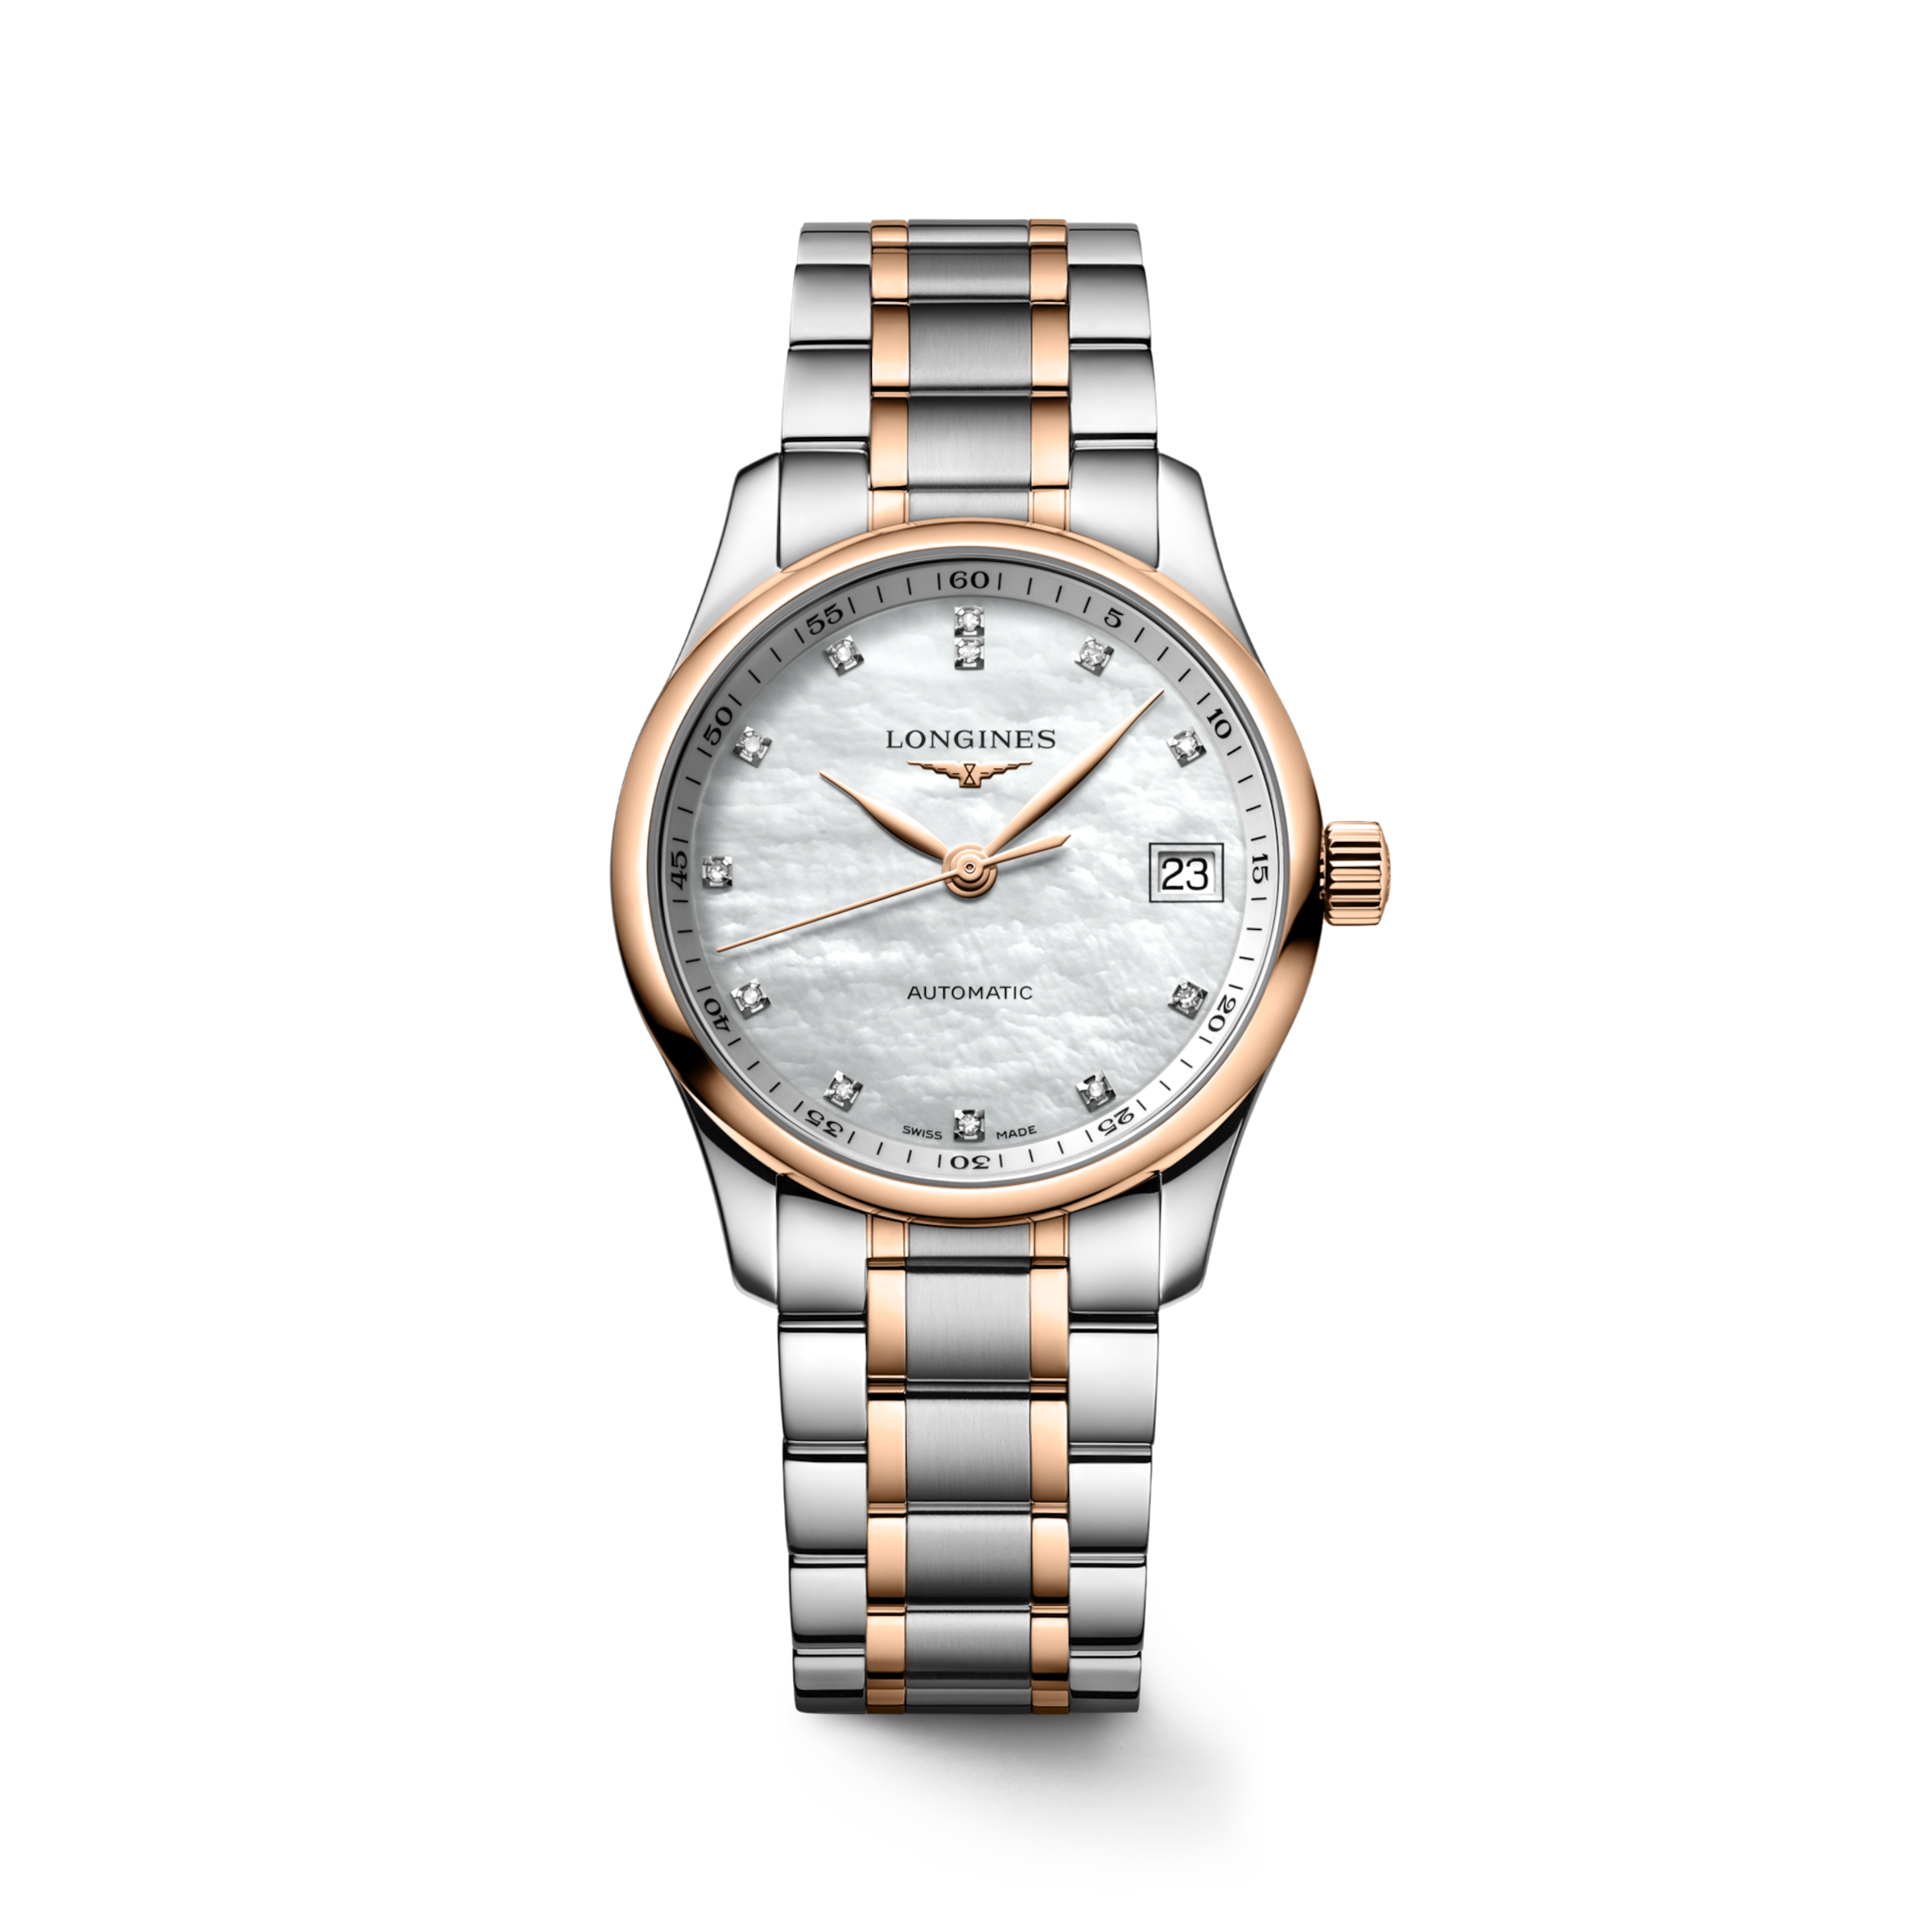 Longines MASTER COLLECTION Automatic Stainless steel and 18 karat pink gold cap 200 Watch - L2.357.5.89.7